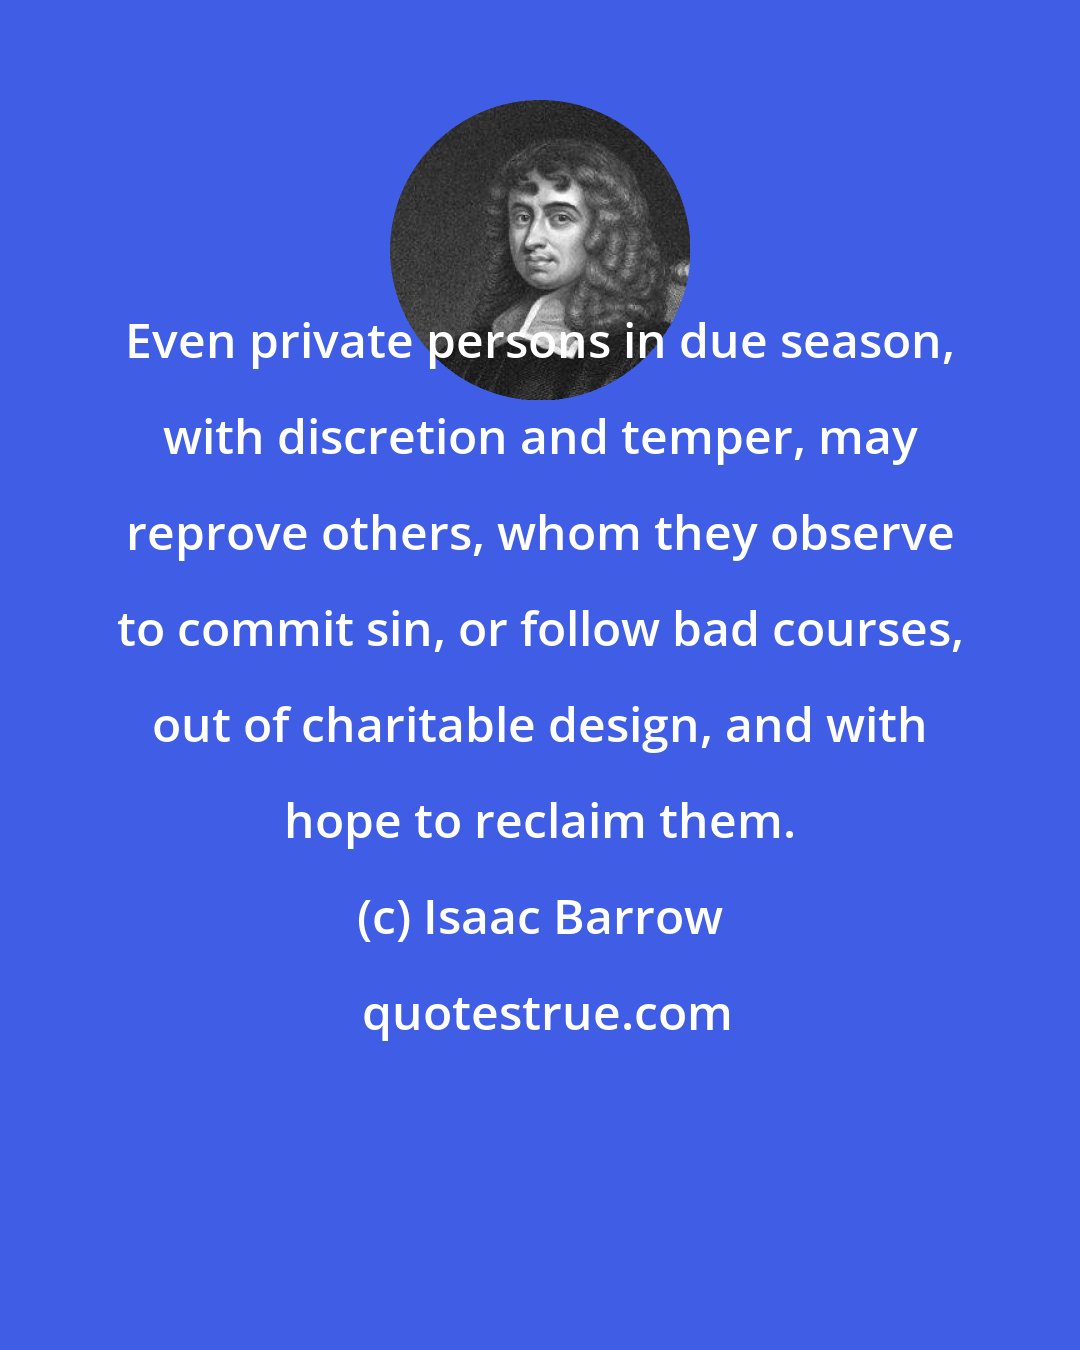 Isaac Barrow: Even private persons in due season, with discretion and temper, may reprove others, whom they observe to commit sin, or follow bad courses, out of charitable design, and with hope to reclaim them.